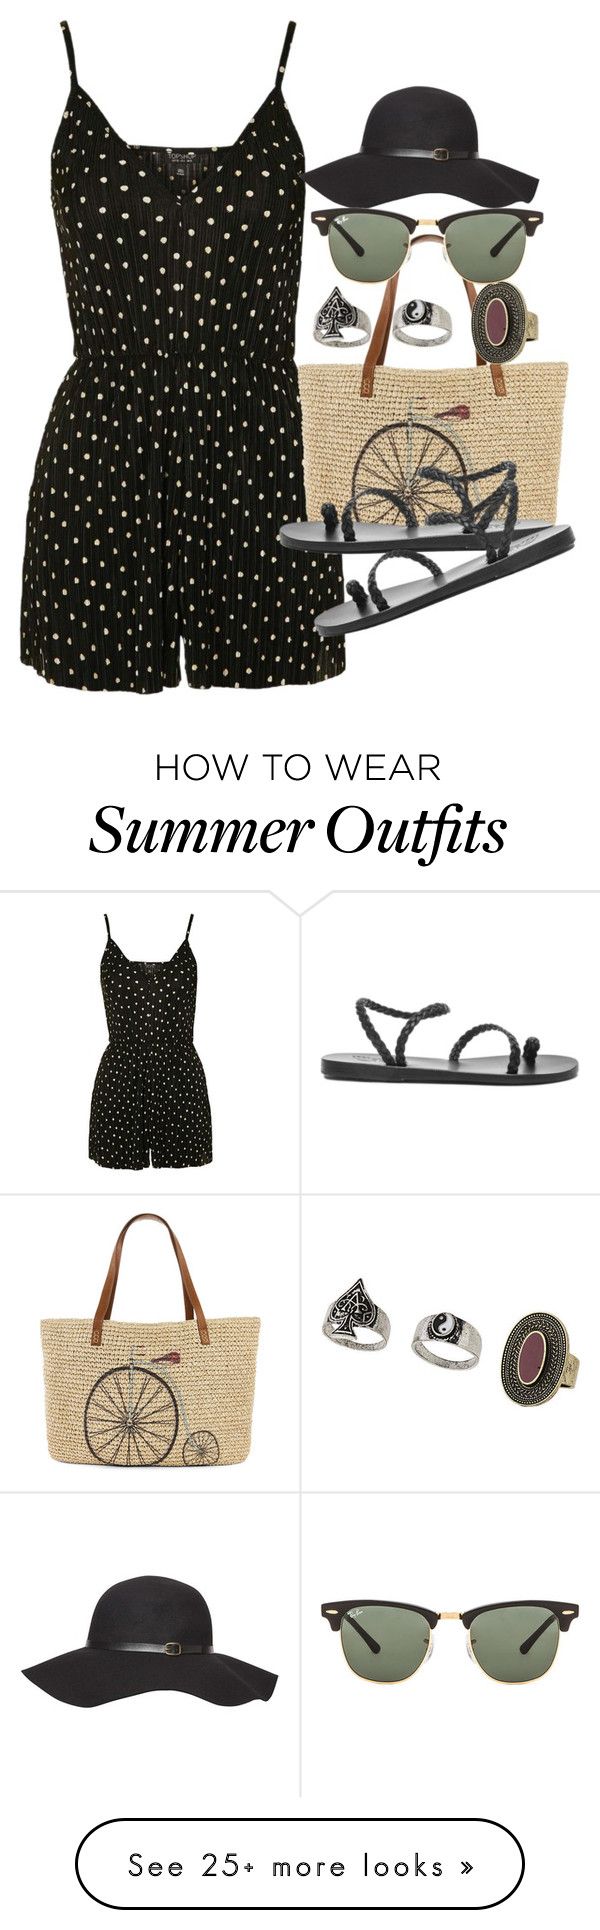 "Outfit for summer with a play suit" by smirnova-varya on Polyvore fea...